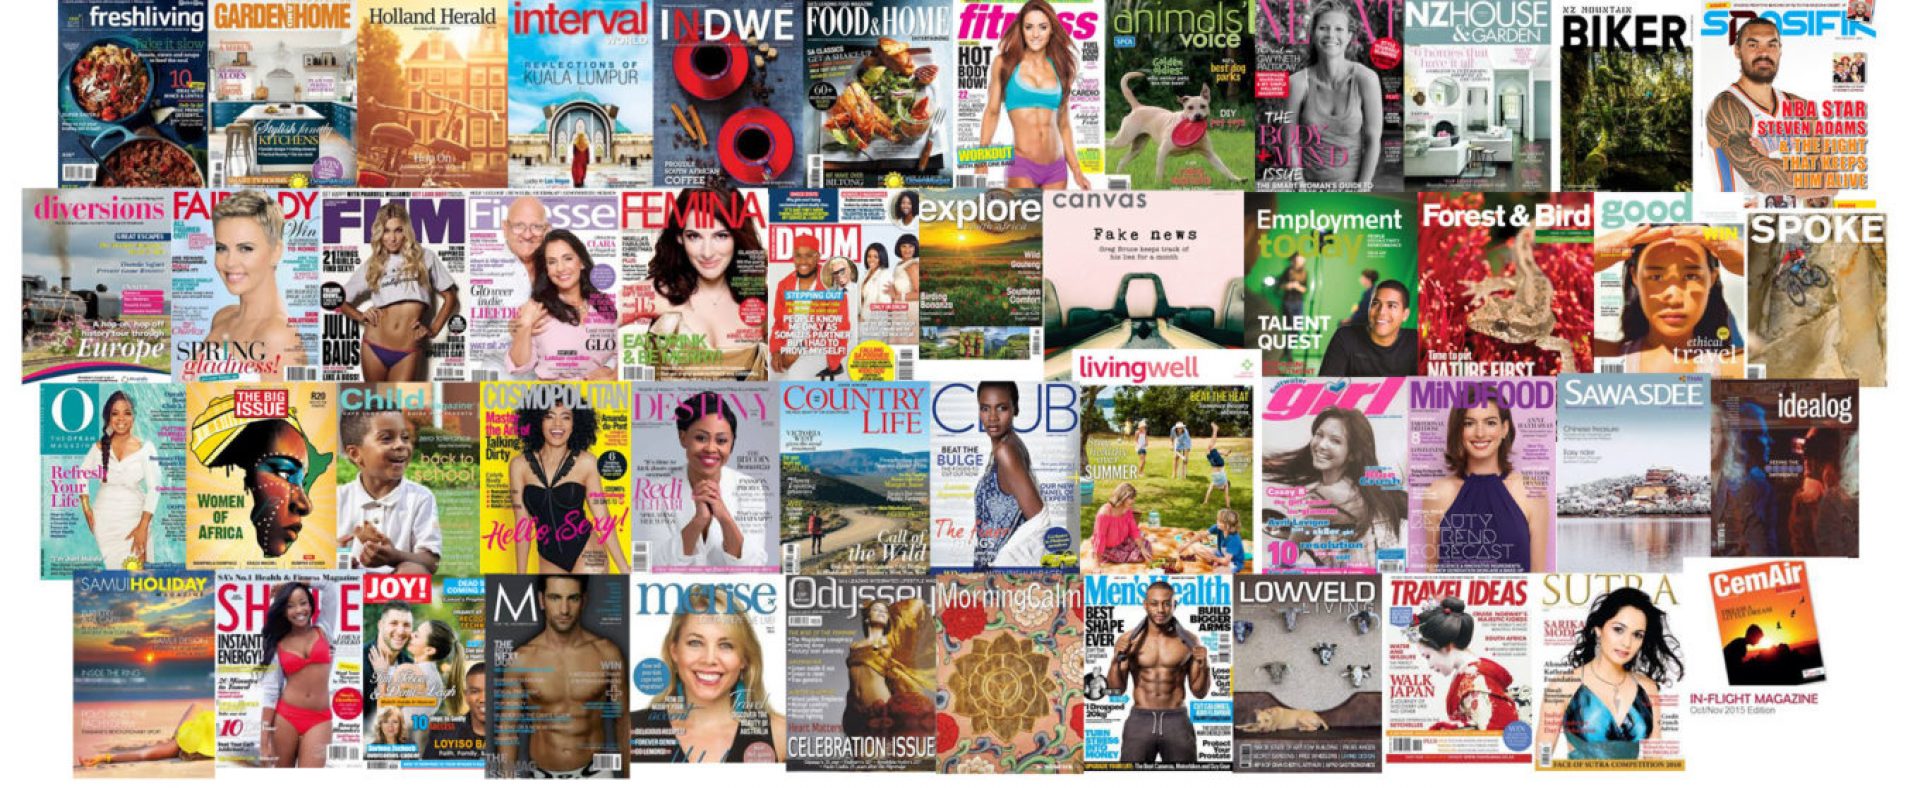 Journalism writing course publishing successes in magazines worldwide